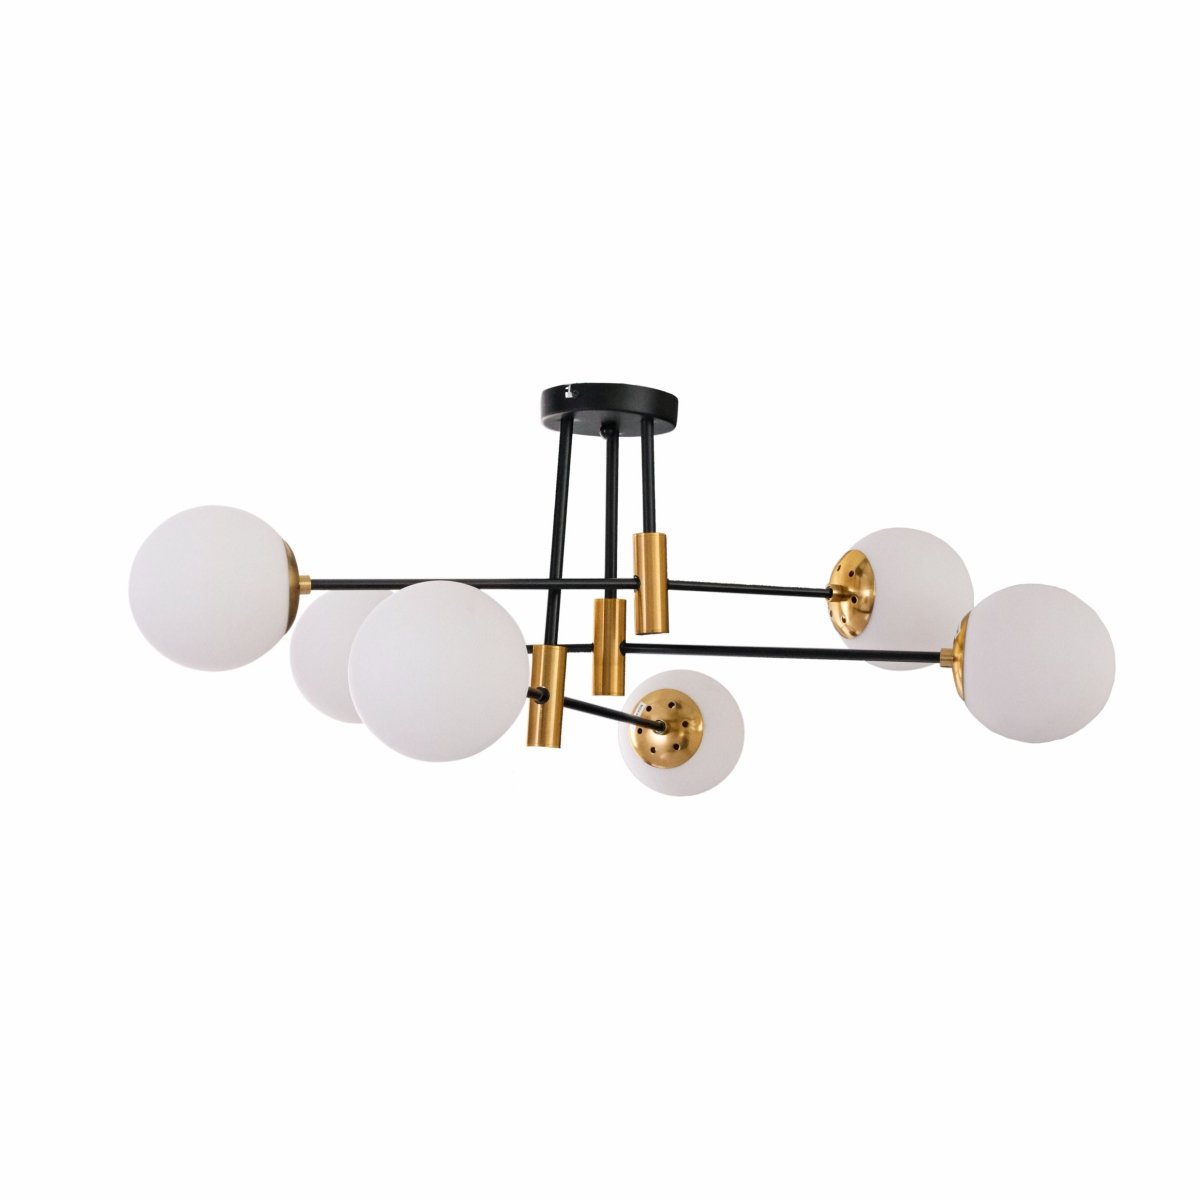 Main image of Opal Glass Globe Gold and Black Metal Semi Flush Ceiling Light with 6xE27 Fitting | TEKLED 159-17436